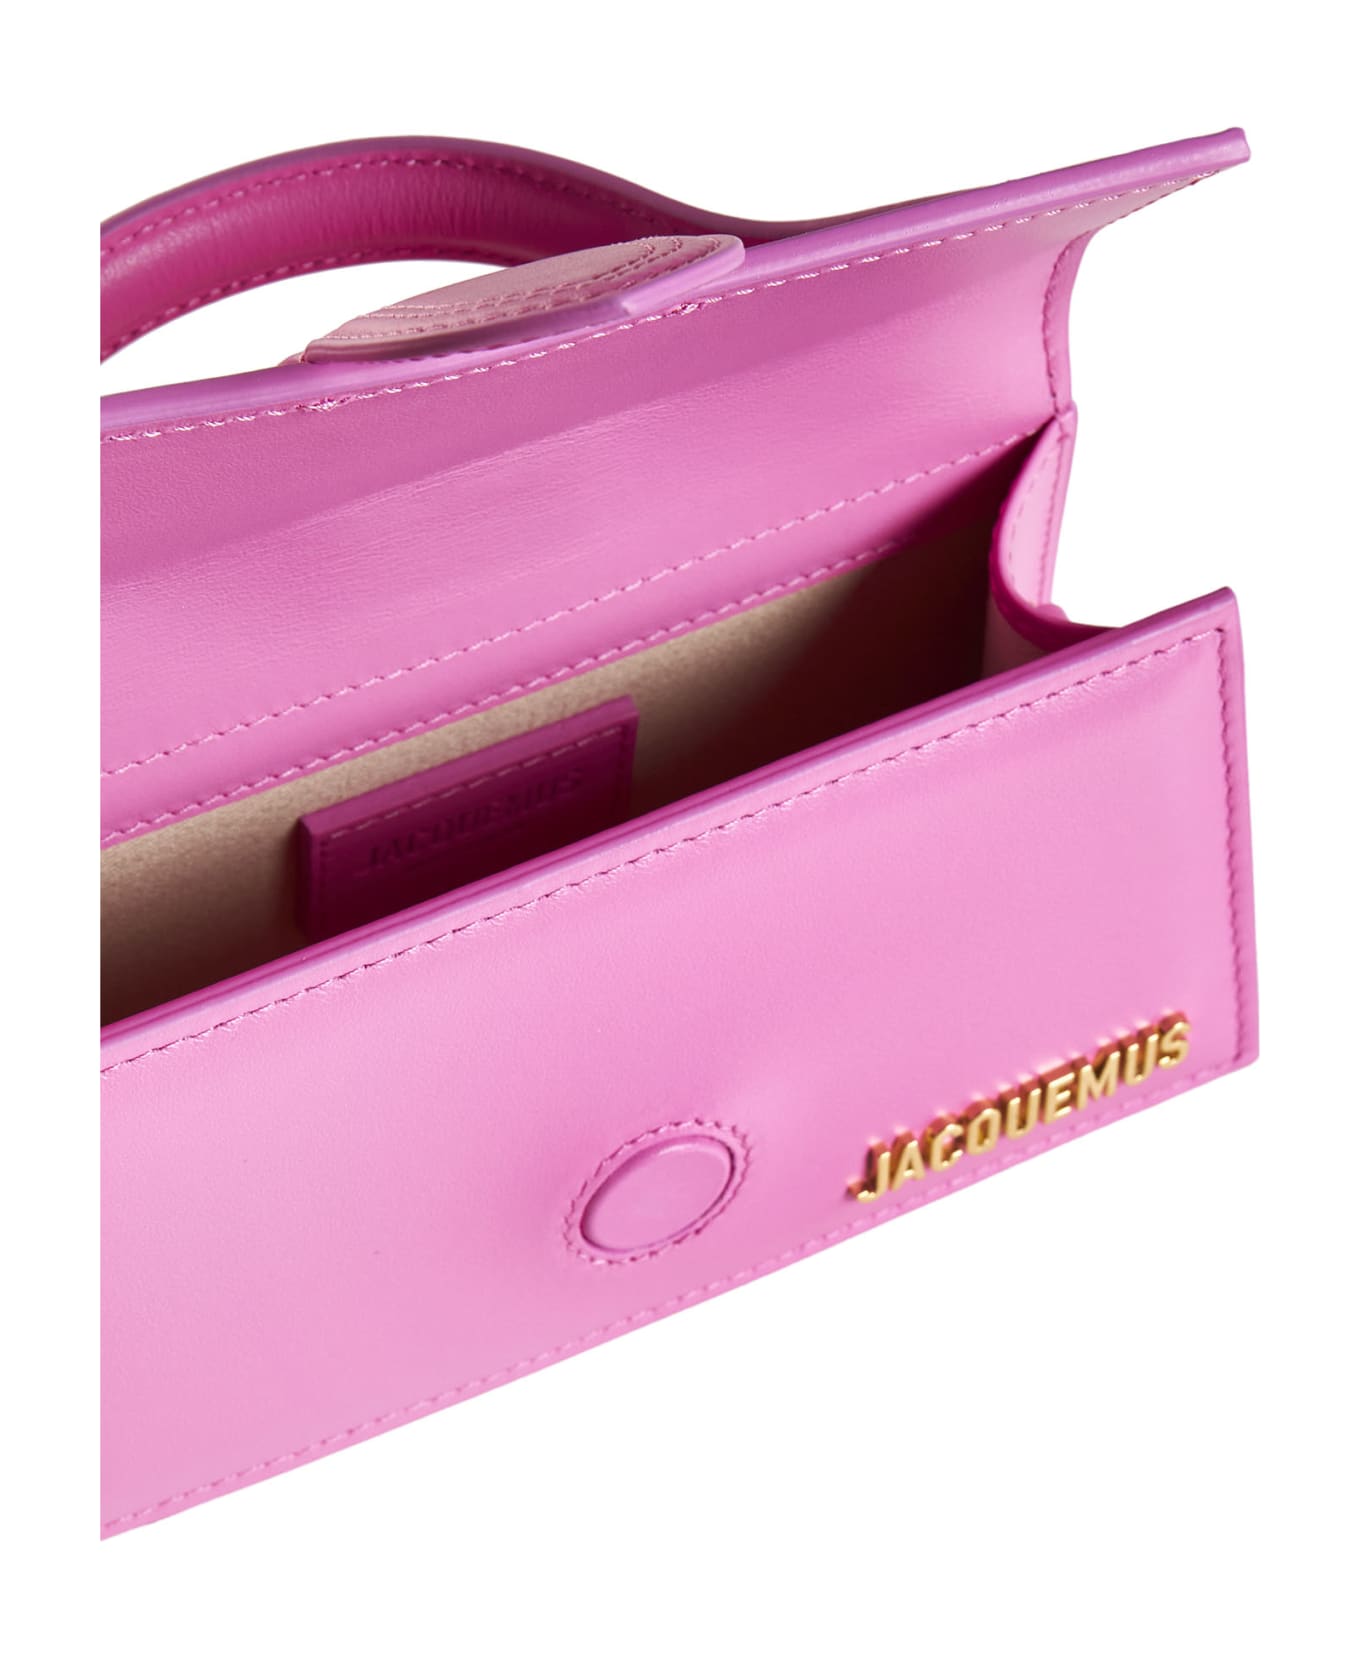 Jacquemus Le Bambino Leather Top Handle Bag - Neon pink トートバッグ